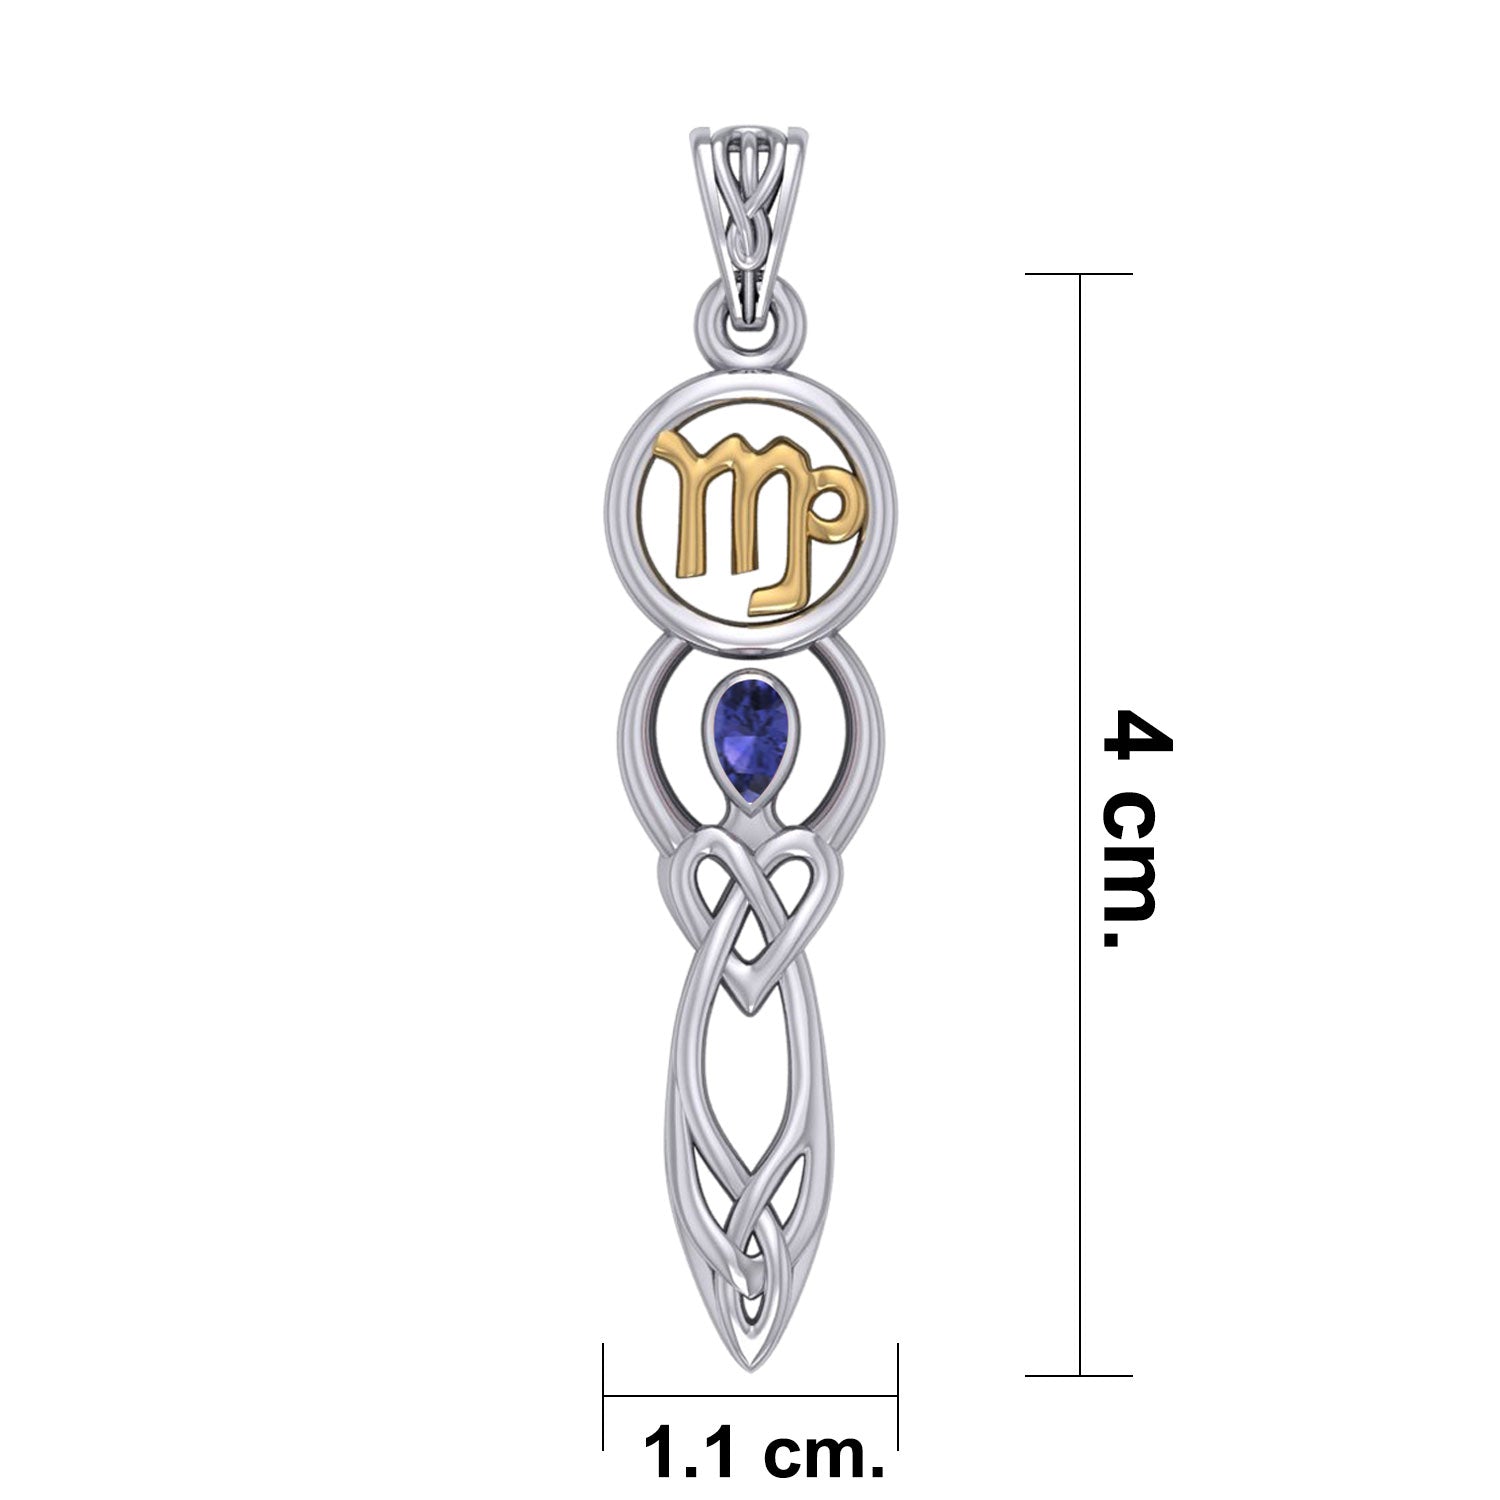 Celtic Goddess Virgo Astrology Zodiac Sign Silver and Gold Accents Pendant with Sapphire MPD5940